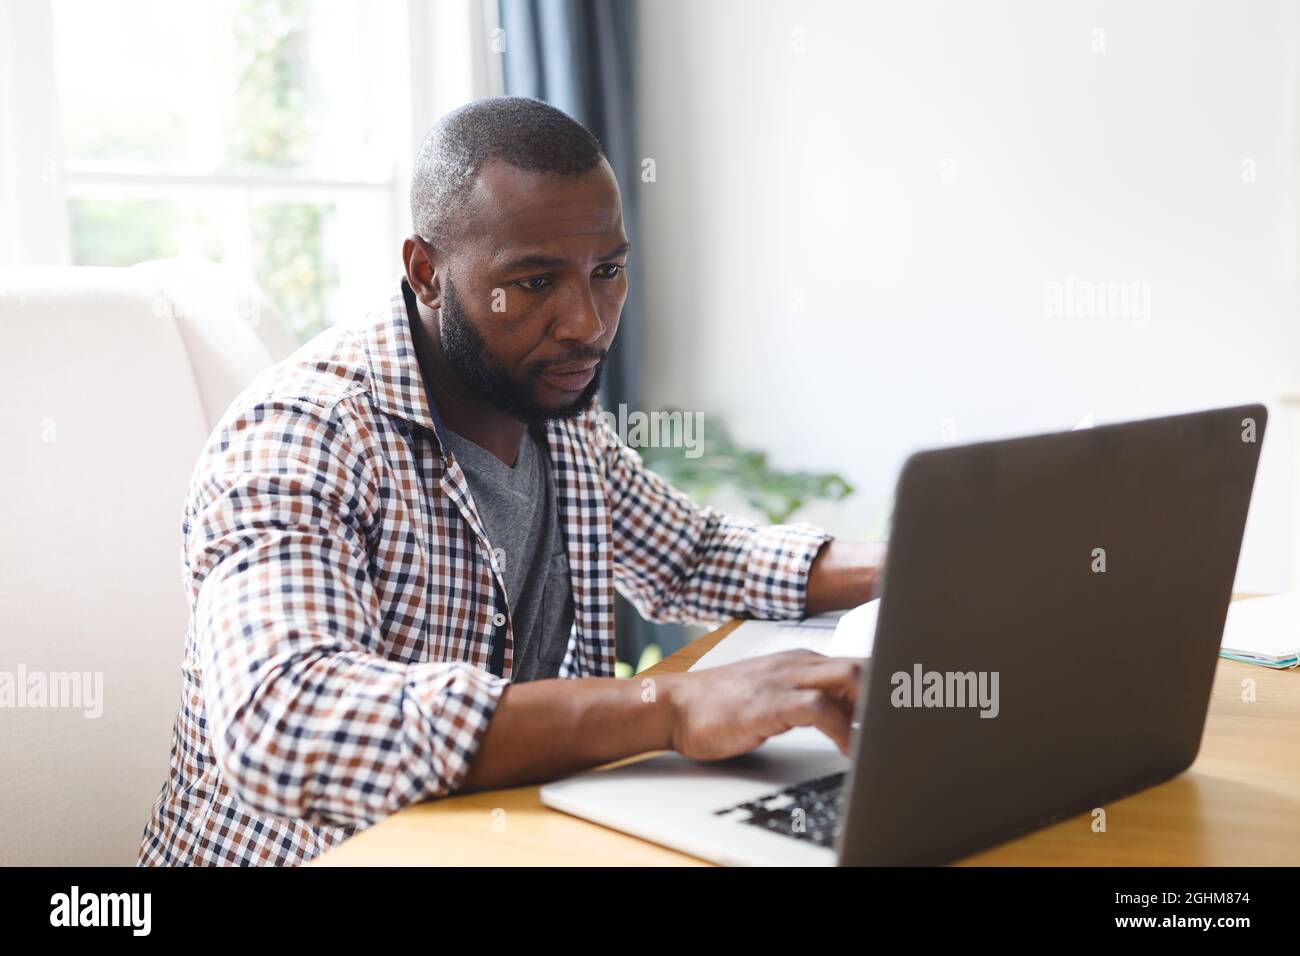 African american man sitting at table in dining room, working remotely using laptop Stock Photo